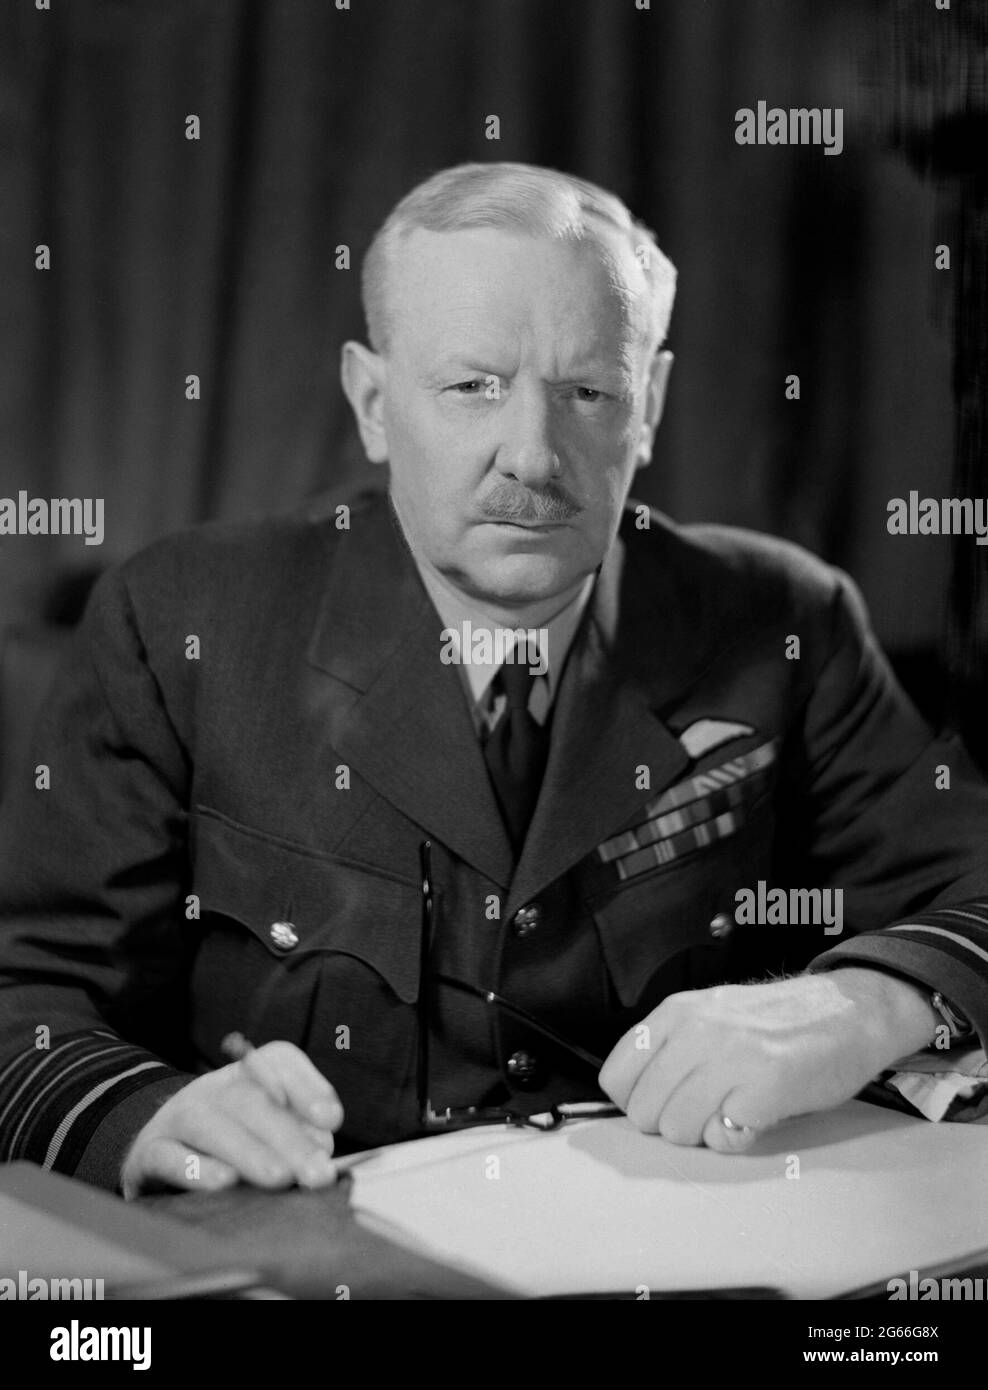 HIGH WYCOMBE, ENGLAND, UK - 24 April 1944 - Portrait of Air Chief Marshall Sir Arthur Harris (more commonly known as 'Bomber Harris'), the Commander i Stock Photo